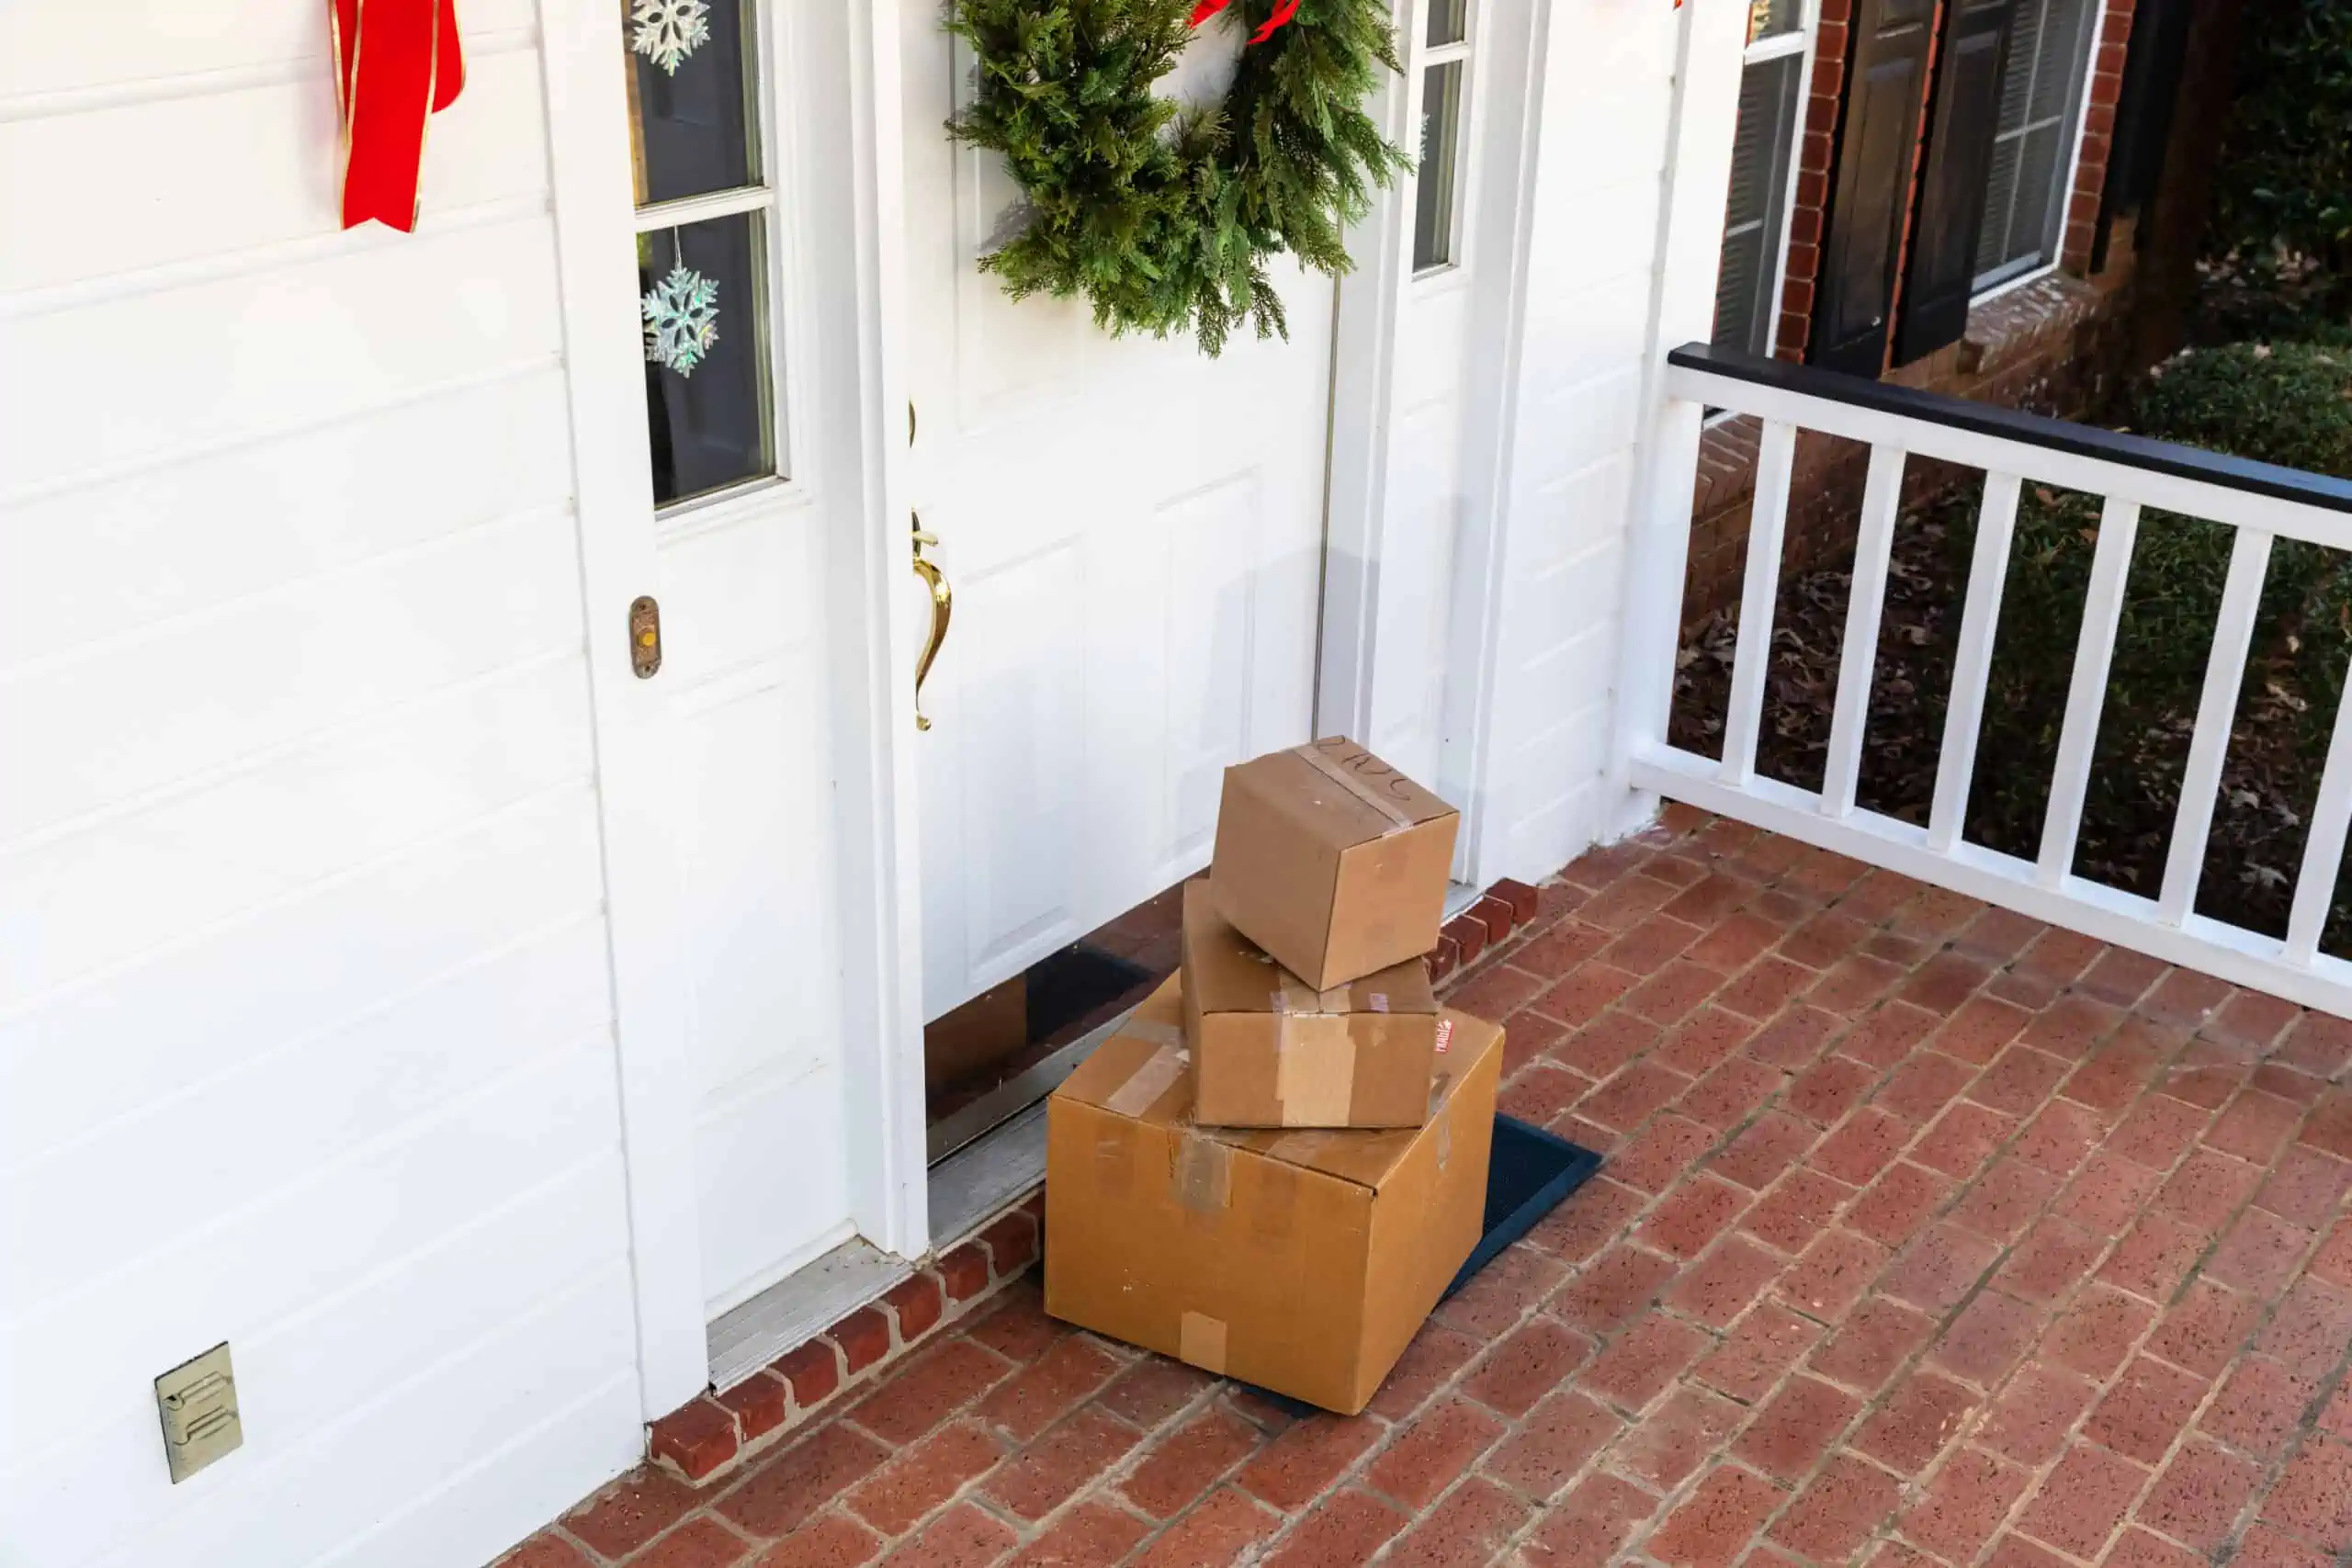 Packages that were purchased using coupons on the front porch of a home during the holiday season.